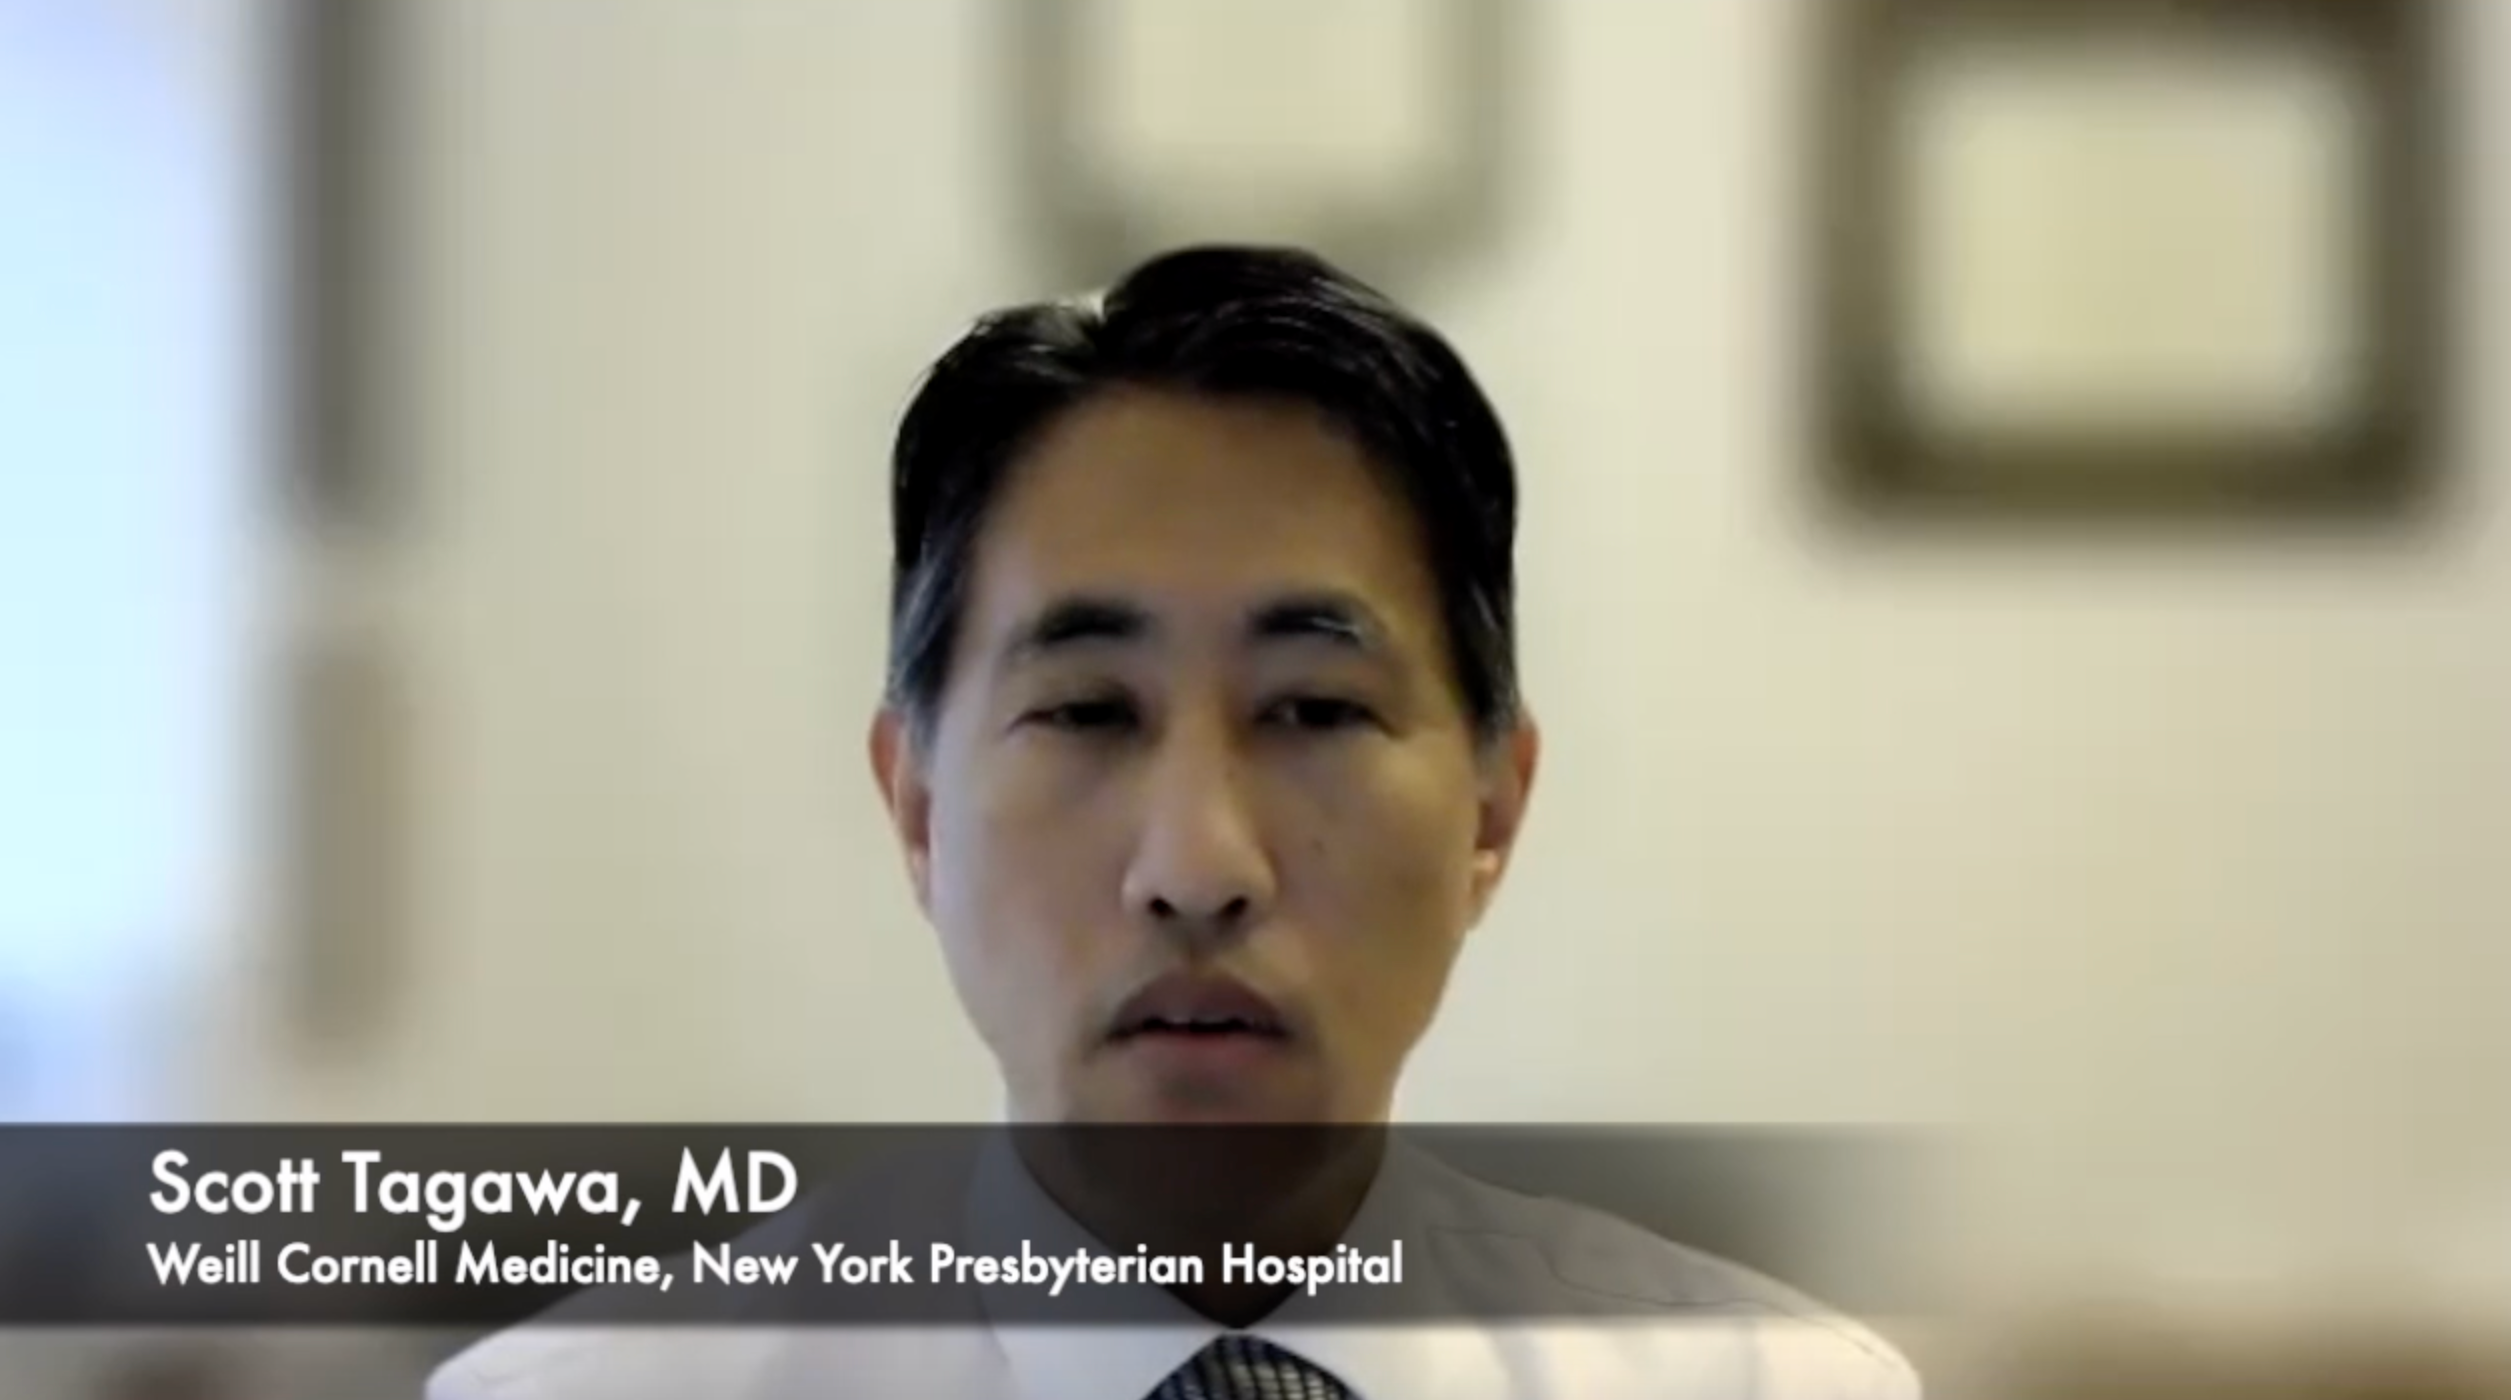 Scott Tagawa, MD, spoke about the implications of the results from his research on treatment patterns of patients with metastatic castration-sensitive prostate cancer, as well as the need for further studies with other data sets.